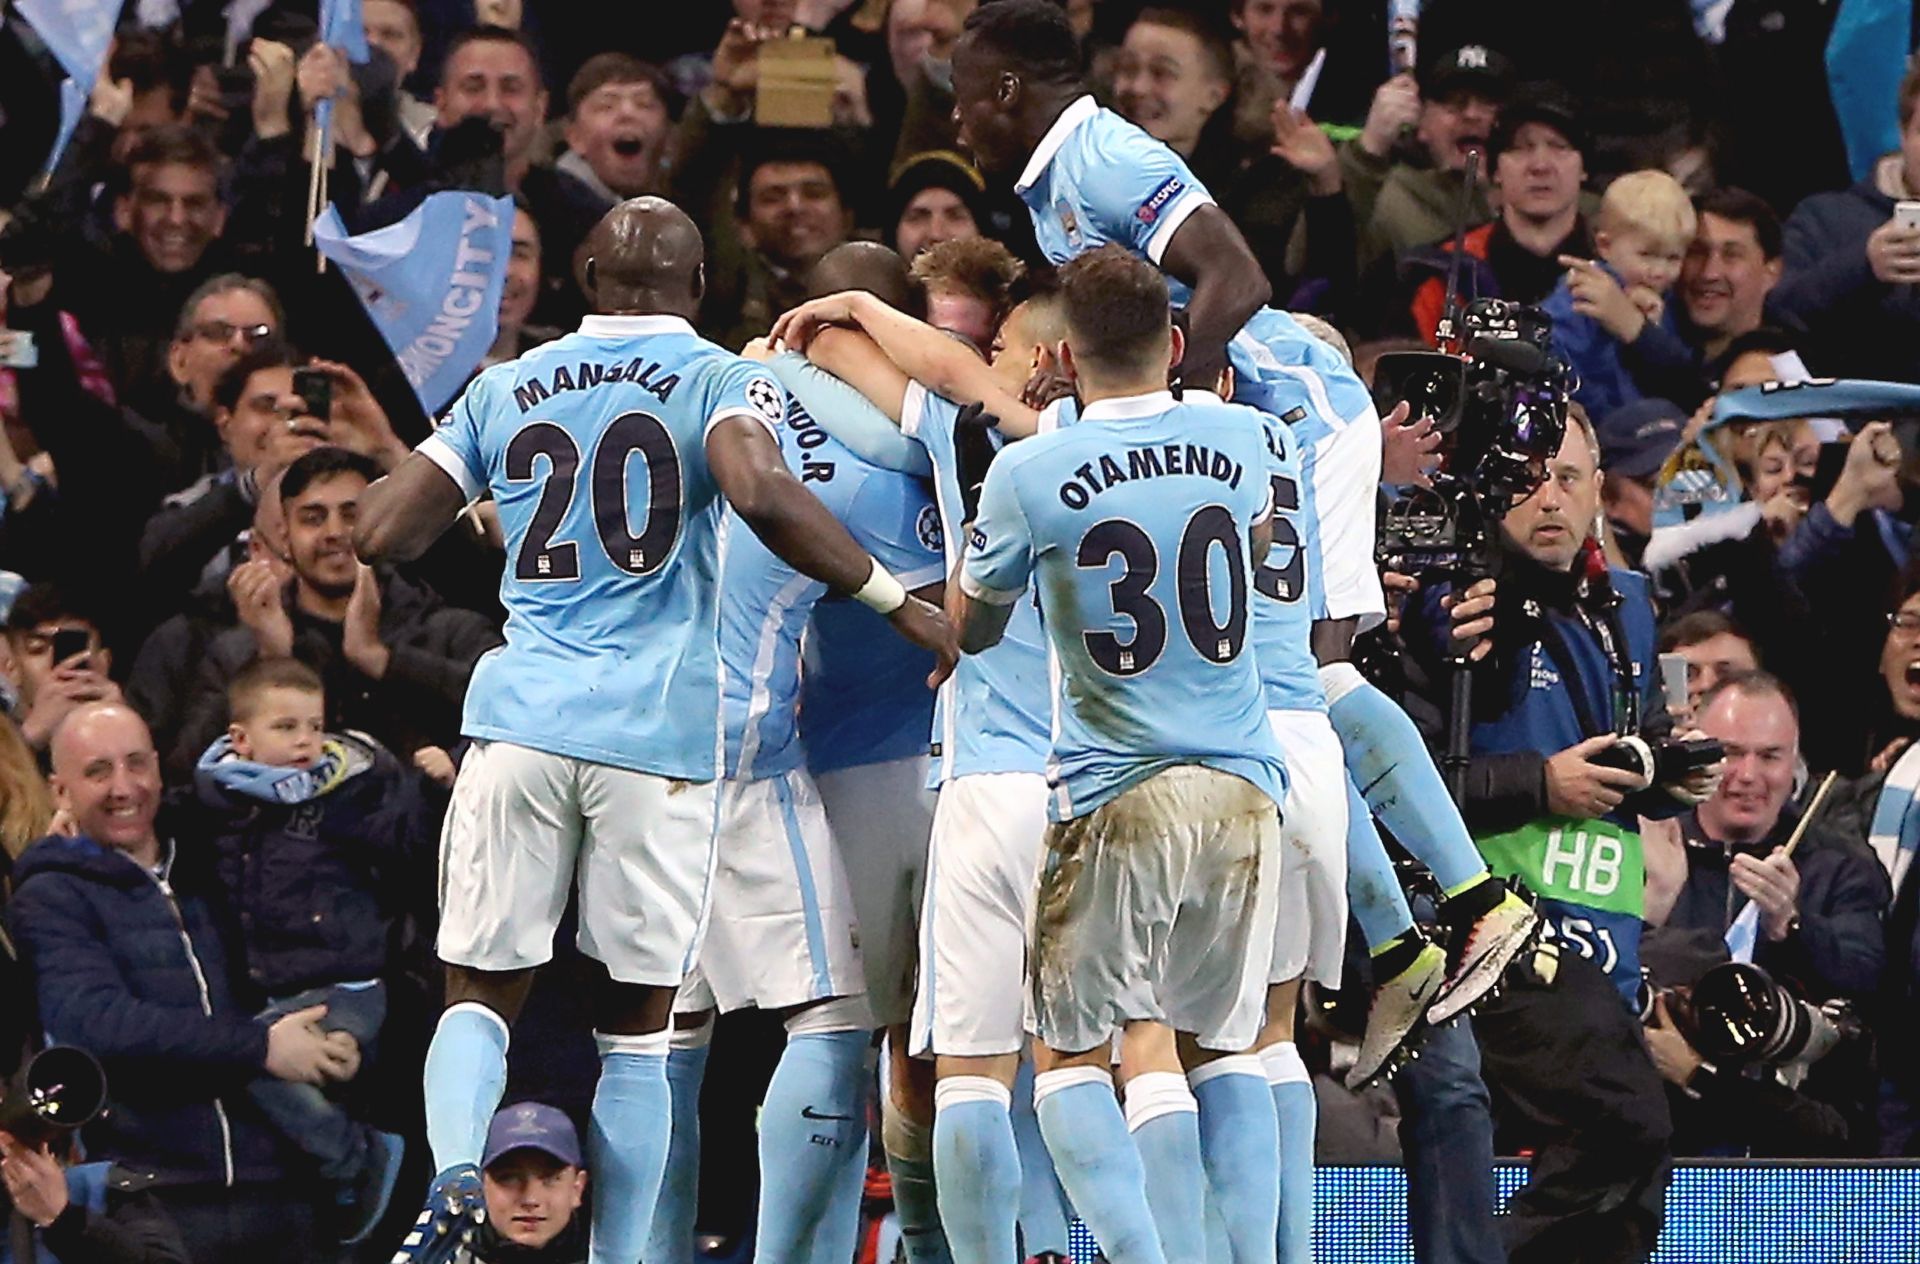 epa05256111 Manchester City's players celebrate the 1-0 lead during the UEFA Champions League quarter final, second leg soccer match between Manchester City and Paris Saint-Germain in Manchester, Britain, 12 April 2016.  EPA/NIGEL RODDIS